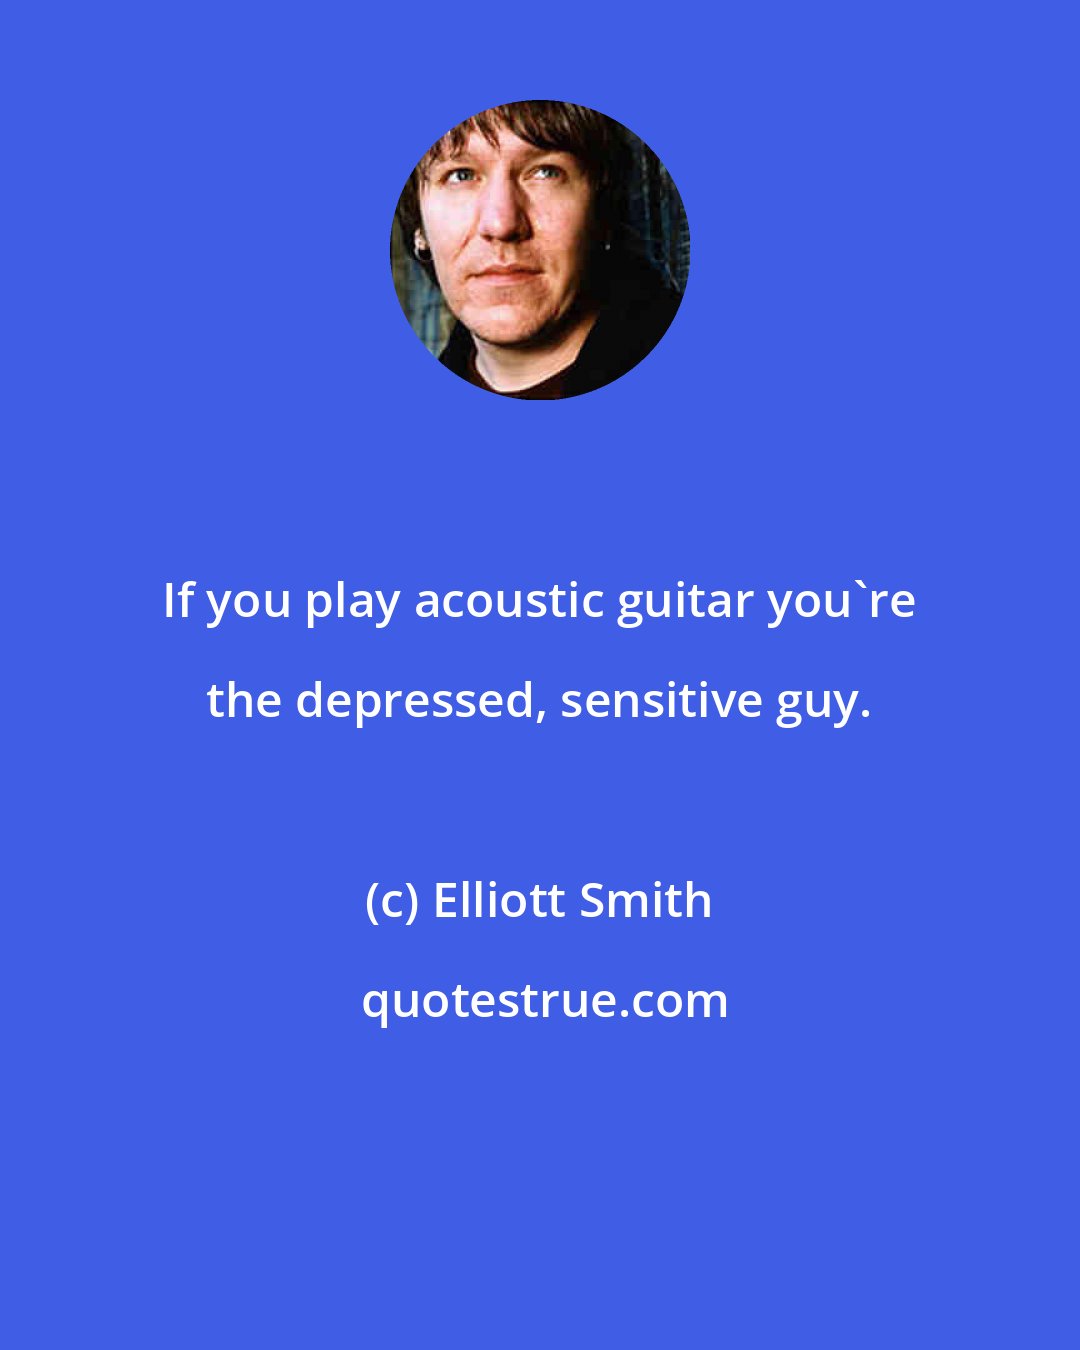 Elliott Smith: If you play acoustic guitar you're the depressed, sensitive guy.